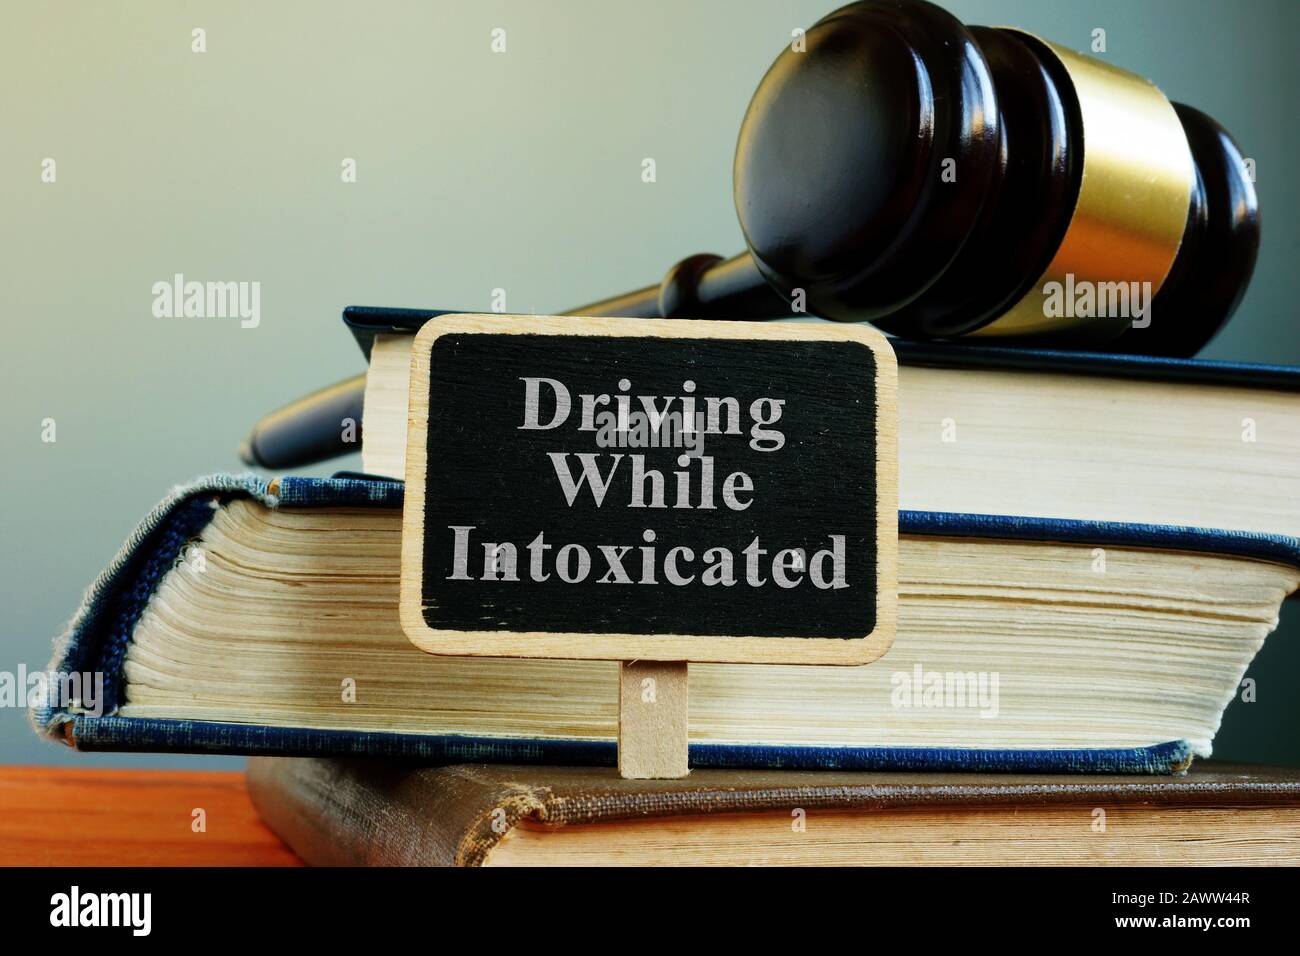 DWI driving while intoxicated law and books. Stock Photo